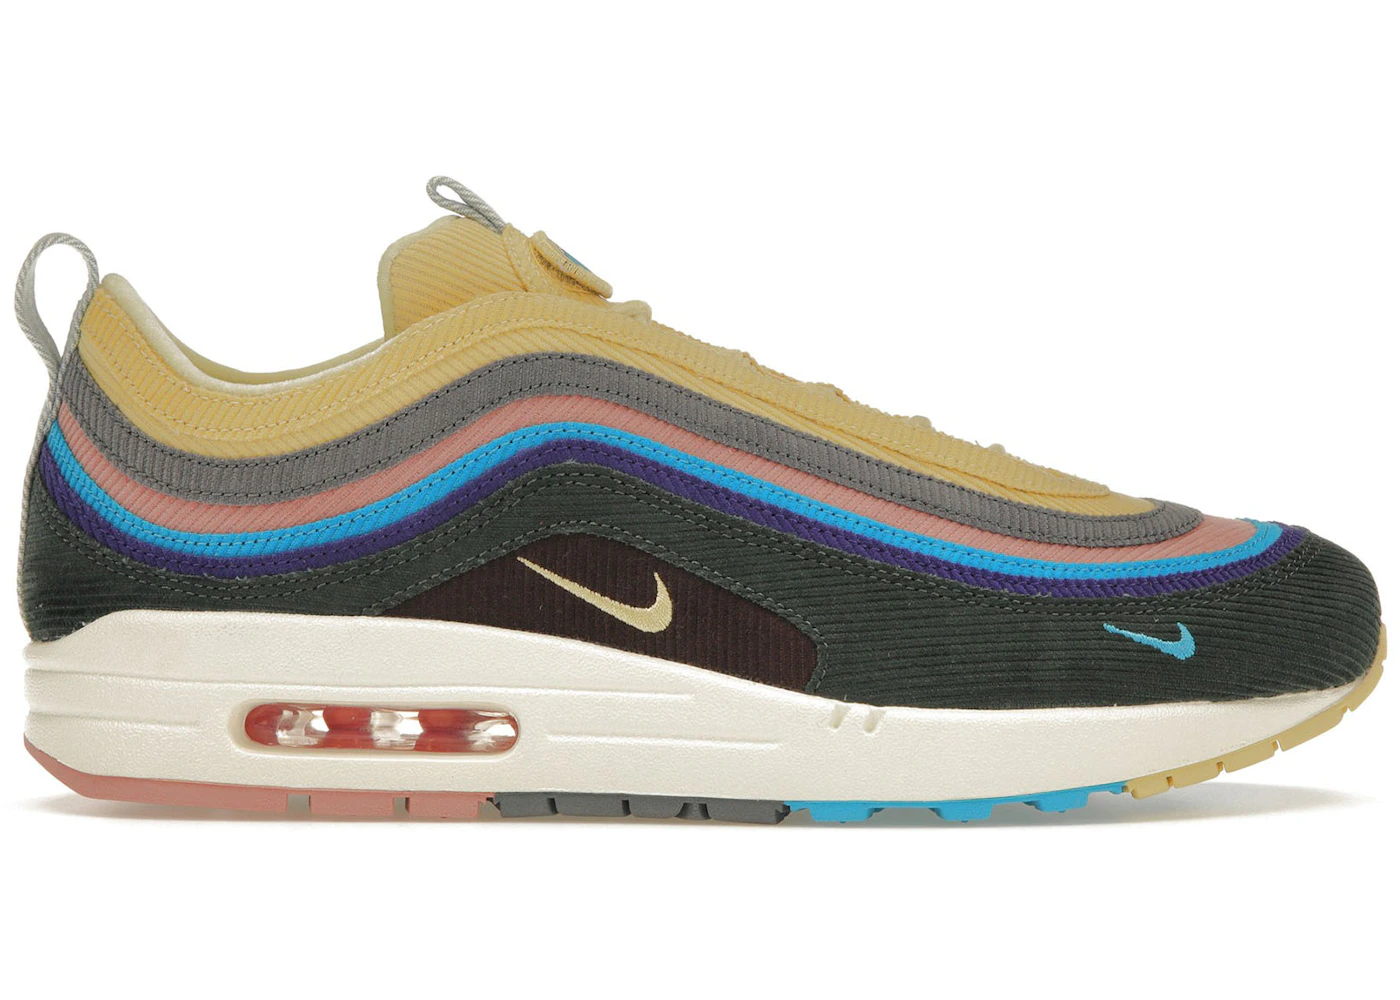 Australia Fourth Diplomacy Nike Air Max 1/97 Sean Wotherspoon (Extra Lace Set Only) - AJ4219-400 - US